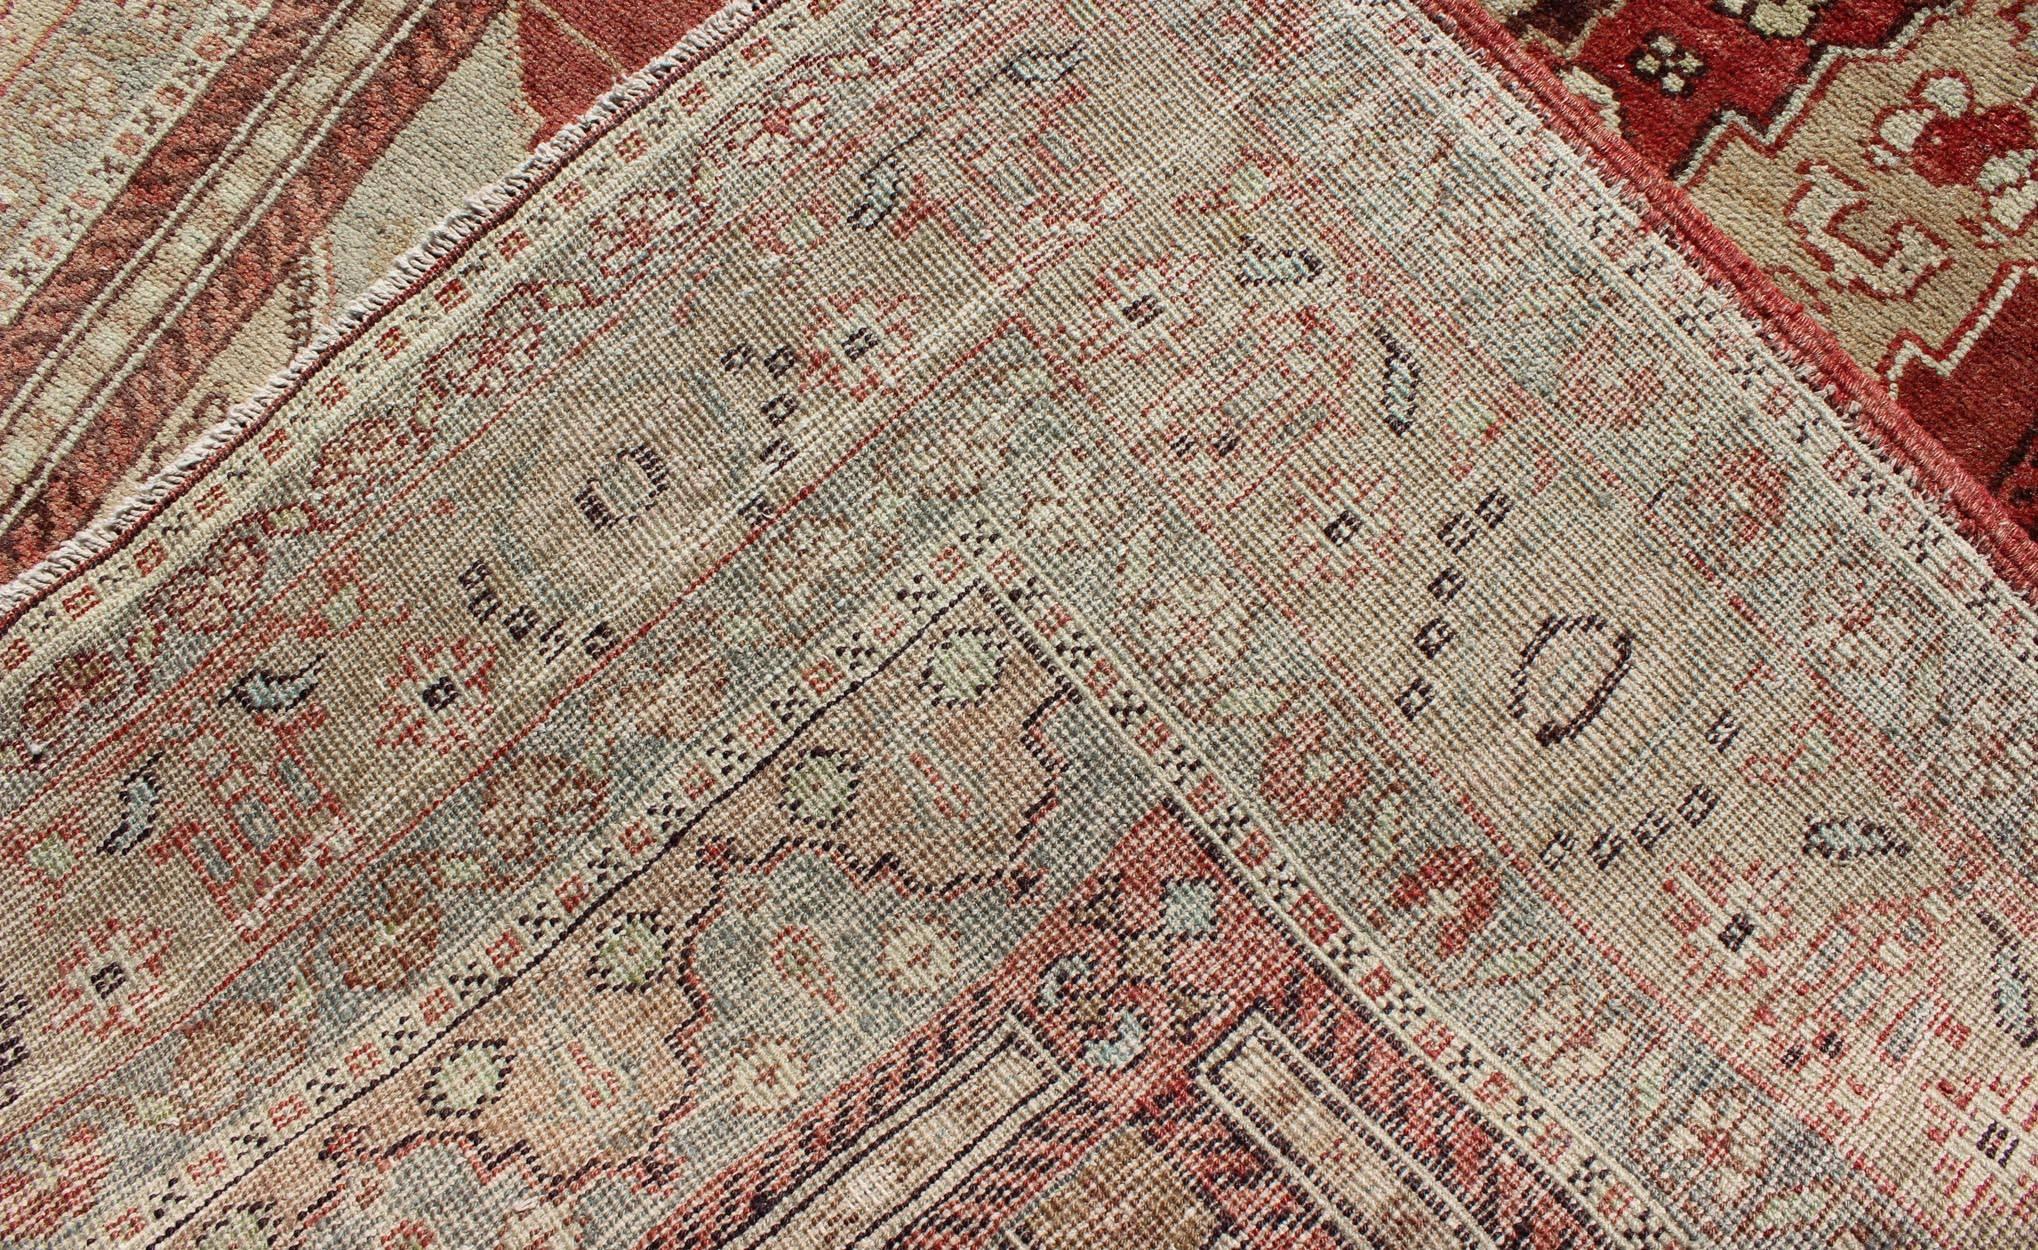 Wool Antique Turkish Oushak Rug with Red, Taupe, Light Green, Cream, Brown & Neutrals For Sale